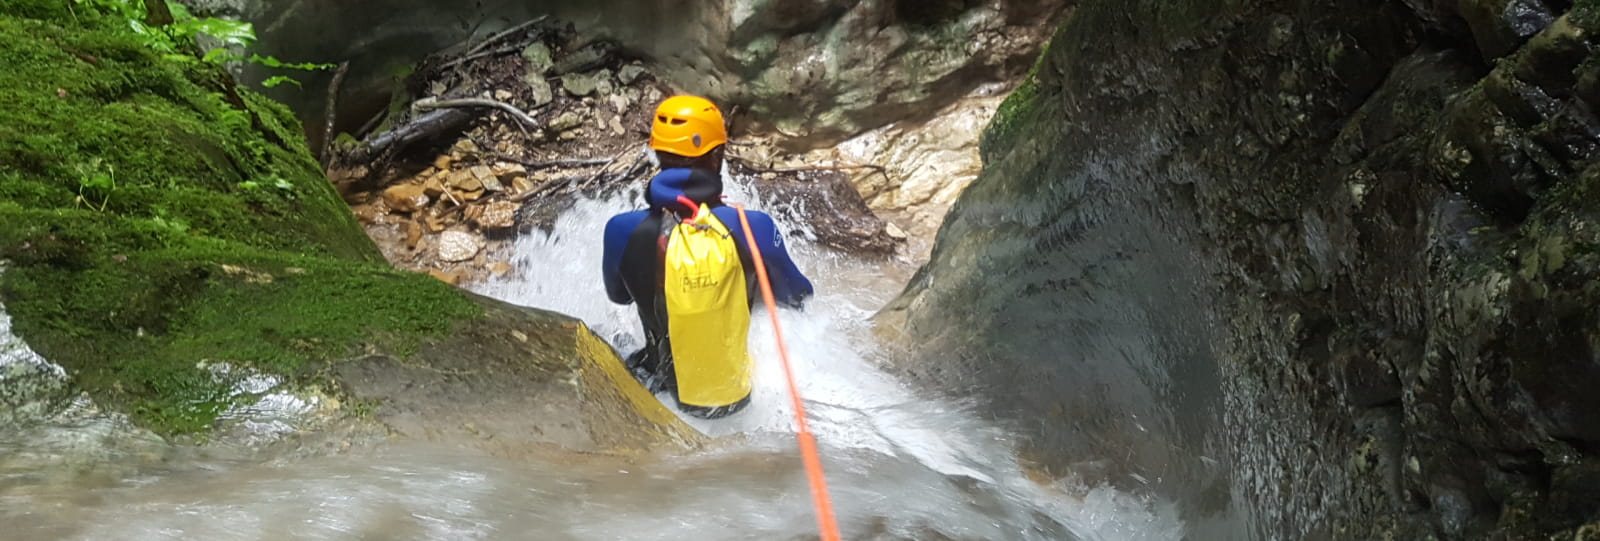 Climbing, Via Ferrata and Canyoning with Frédéric Viret